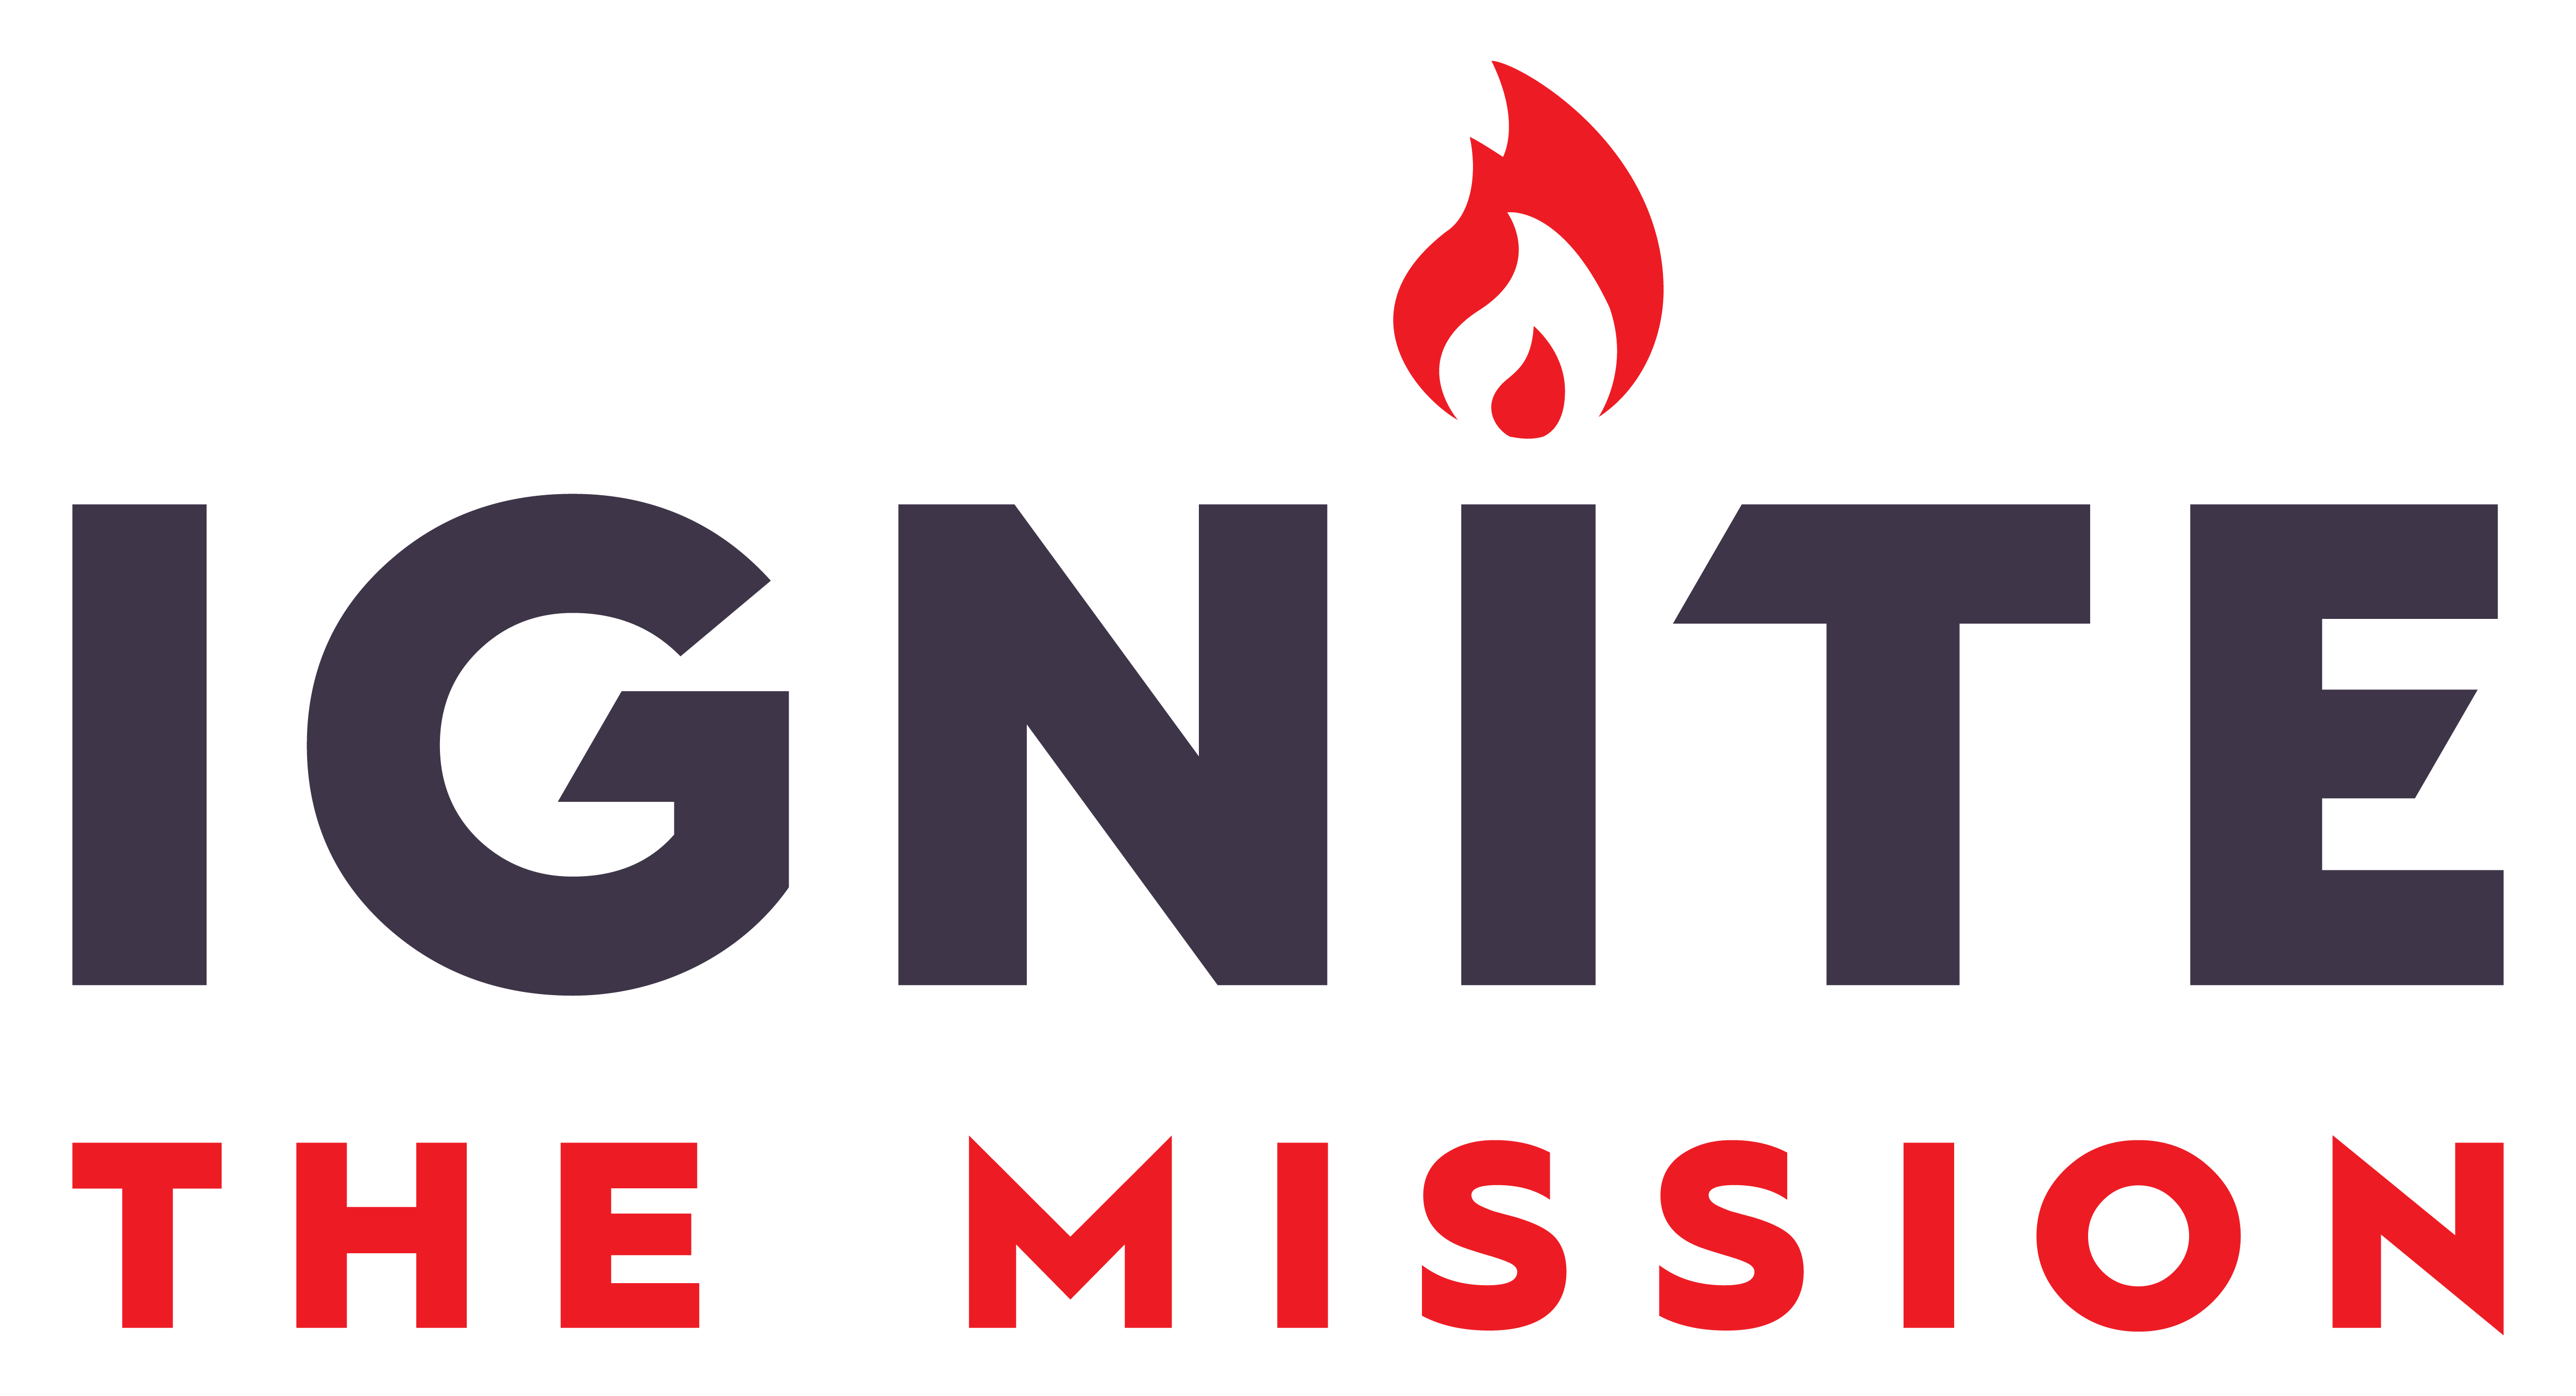 Mission Logo - Ignite the Mission | WaterTower Theatre